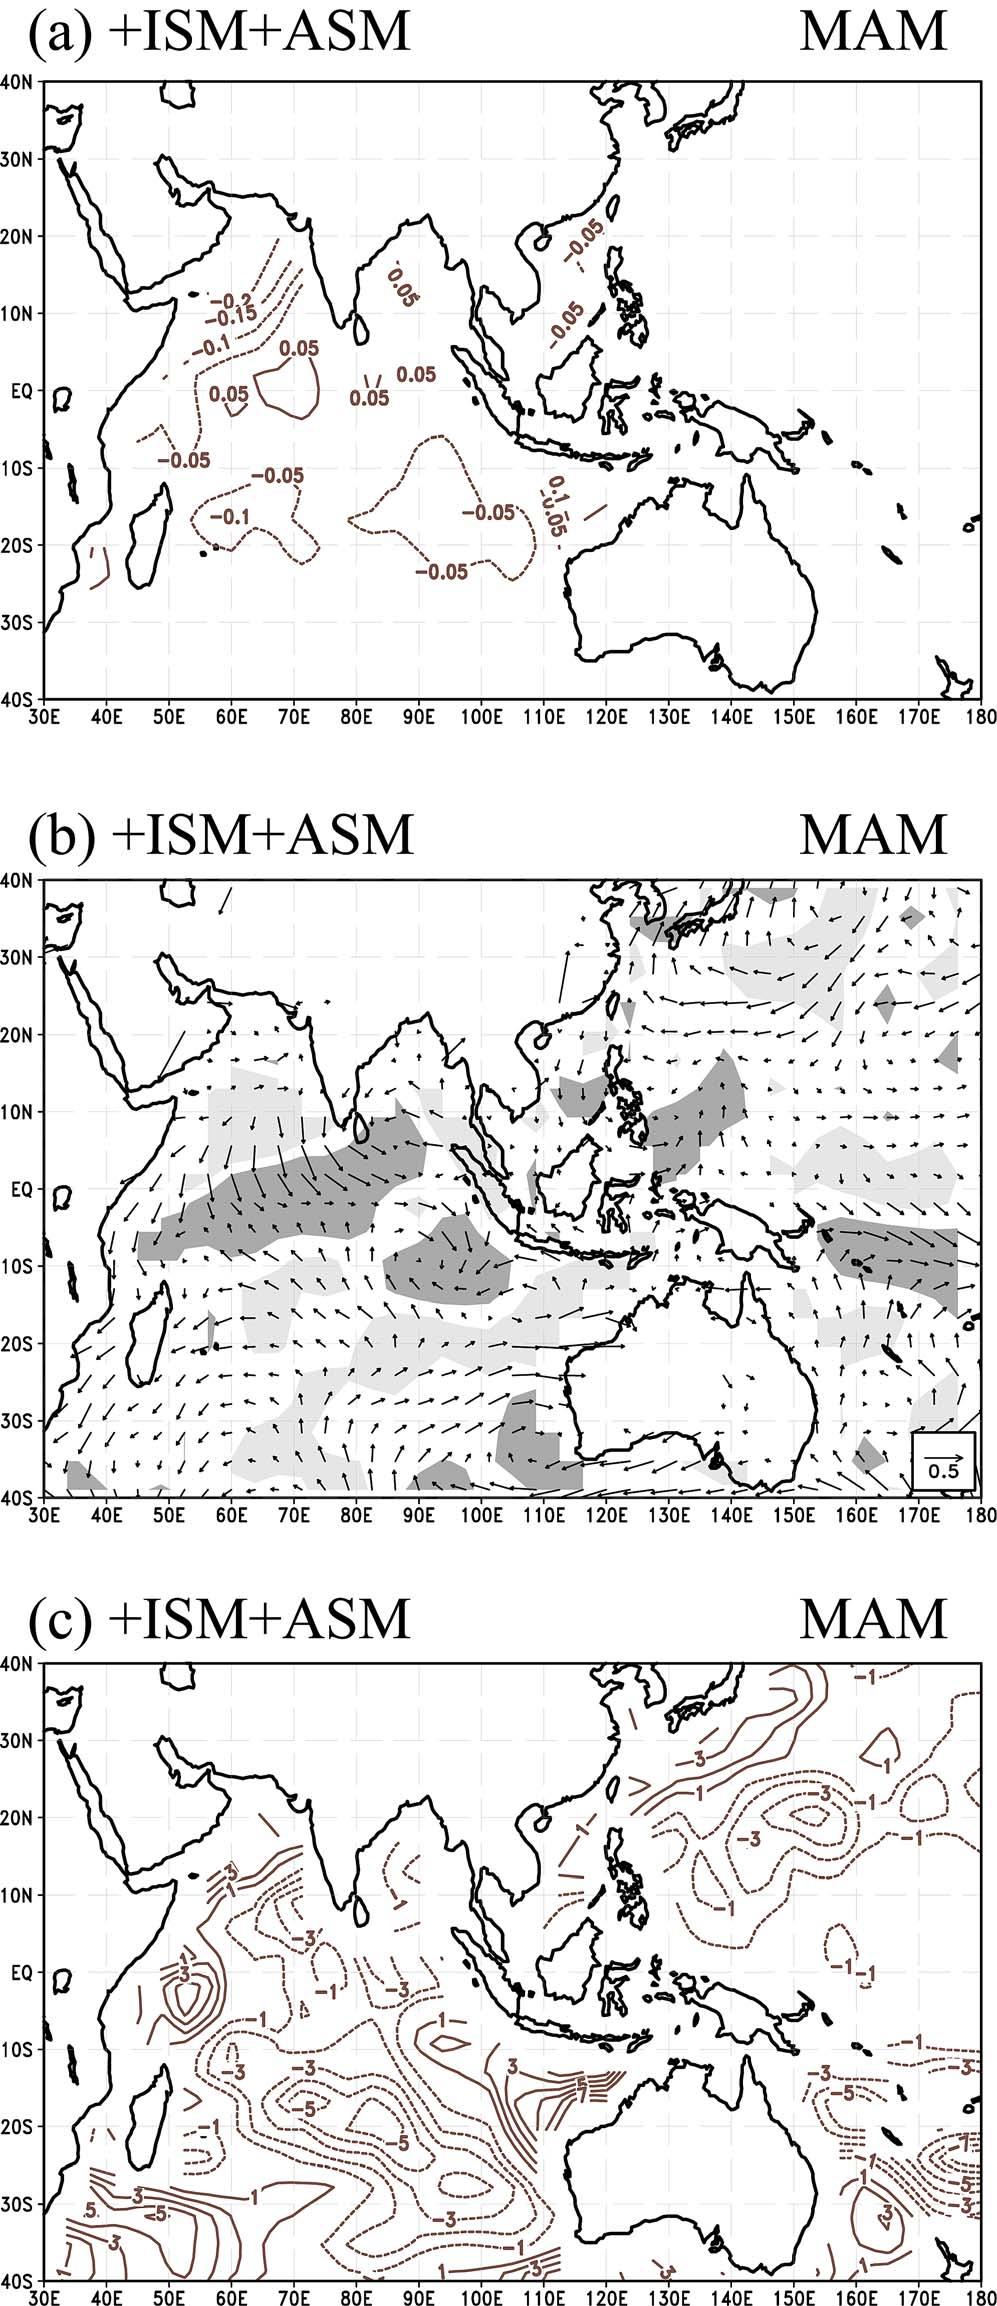 Figure 4. (a) SST anomalies (kelvins), (b) 1000 hpa wind anomalies (m s 1, vector), and (c) latent heat flux anomalies (W m 2 ) in MAM for wet to wet transition.